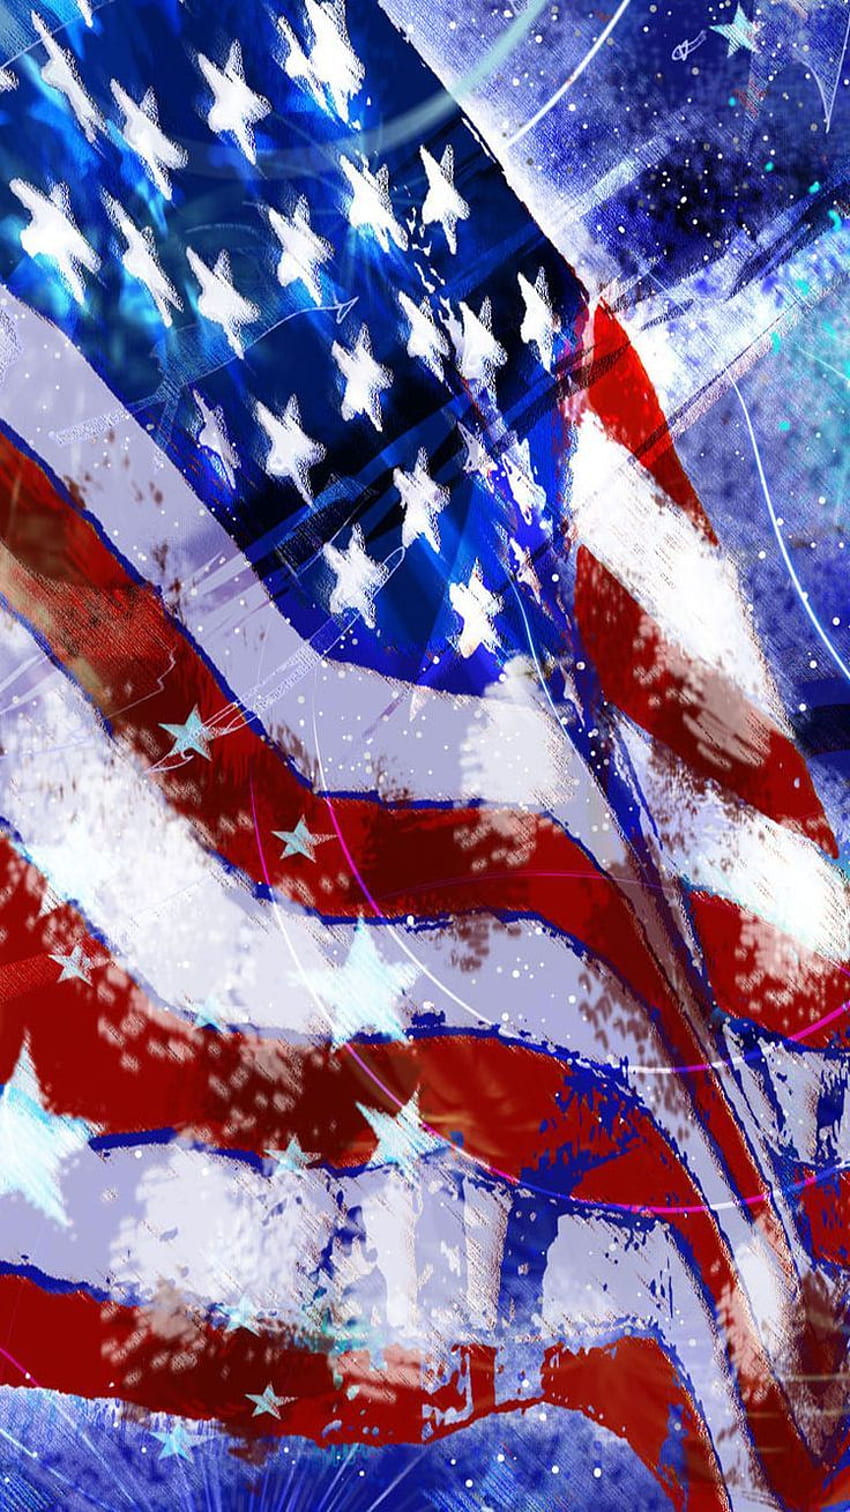 HD wallpaper Independence Day 4th July Federal Holiday In United States Hd  Wallpapers And Background Image For Your Devices Computer Smartphone Or  Tablet 38402160  Wallpaper Flare